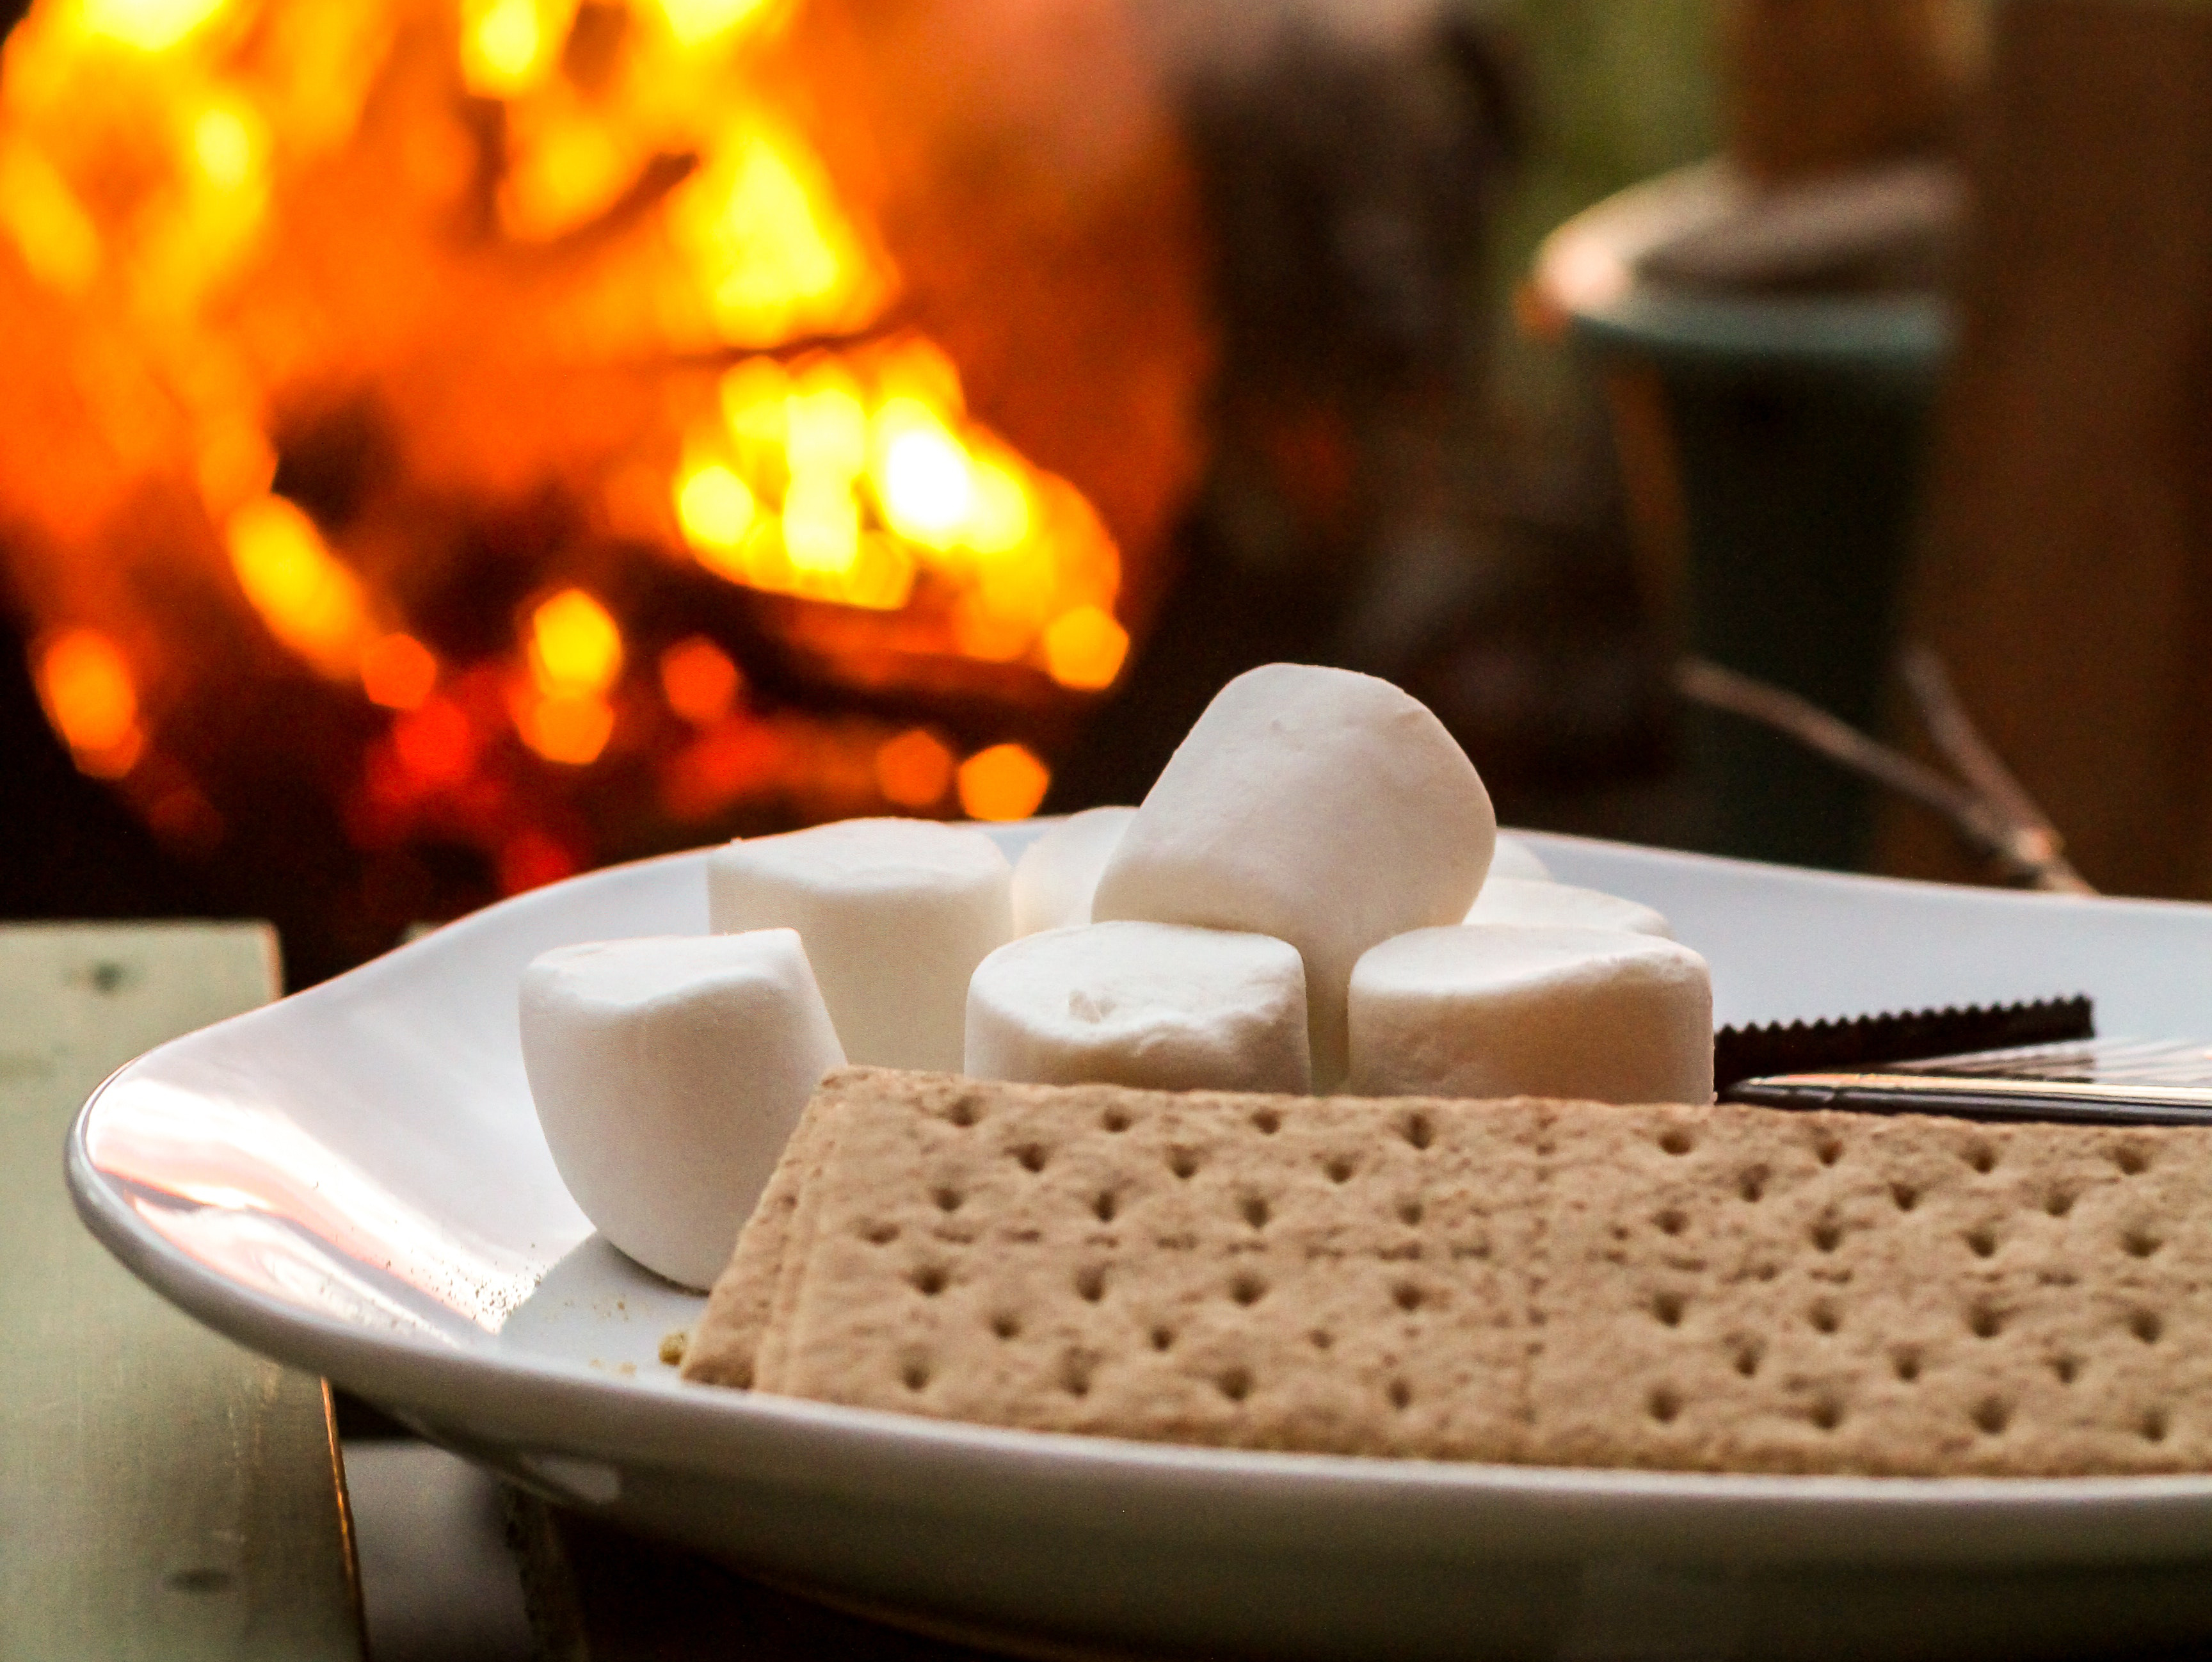 Graham crackers, marshmallows, and chocolate are the key ingredients needed to make s'mores on an open fire. [Photo by Calvin Hanson from Pexels]